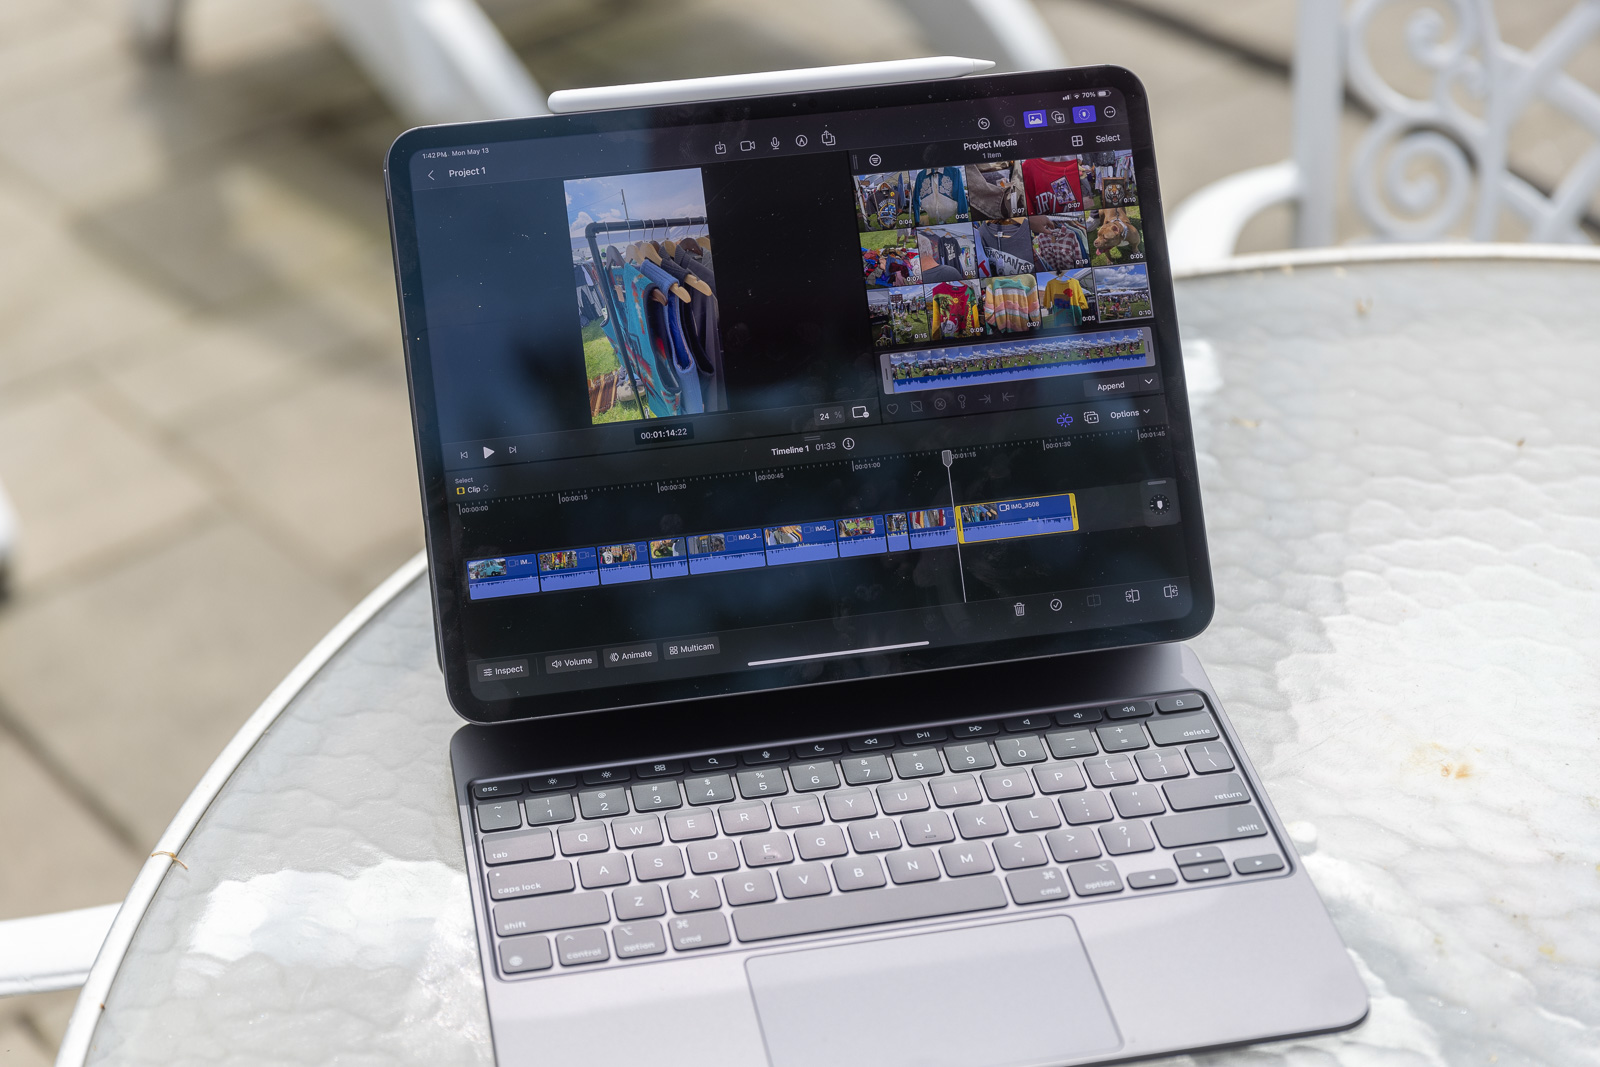 Apple iPad Pro M4 with Final Cut Pro on the screen